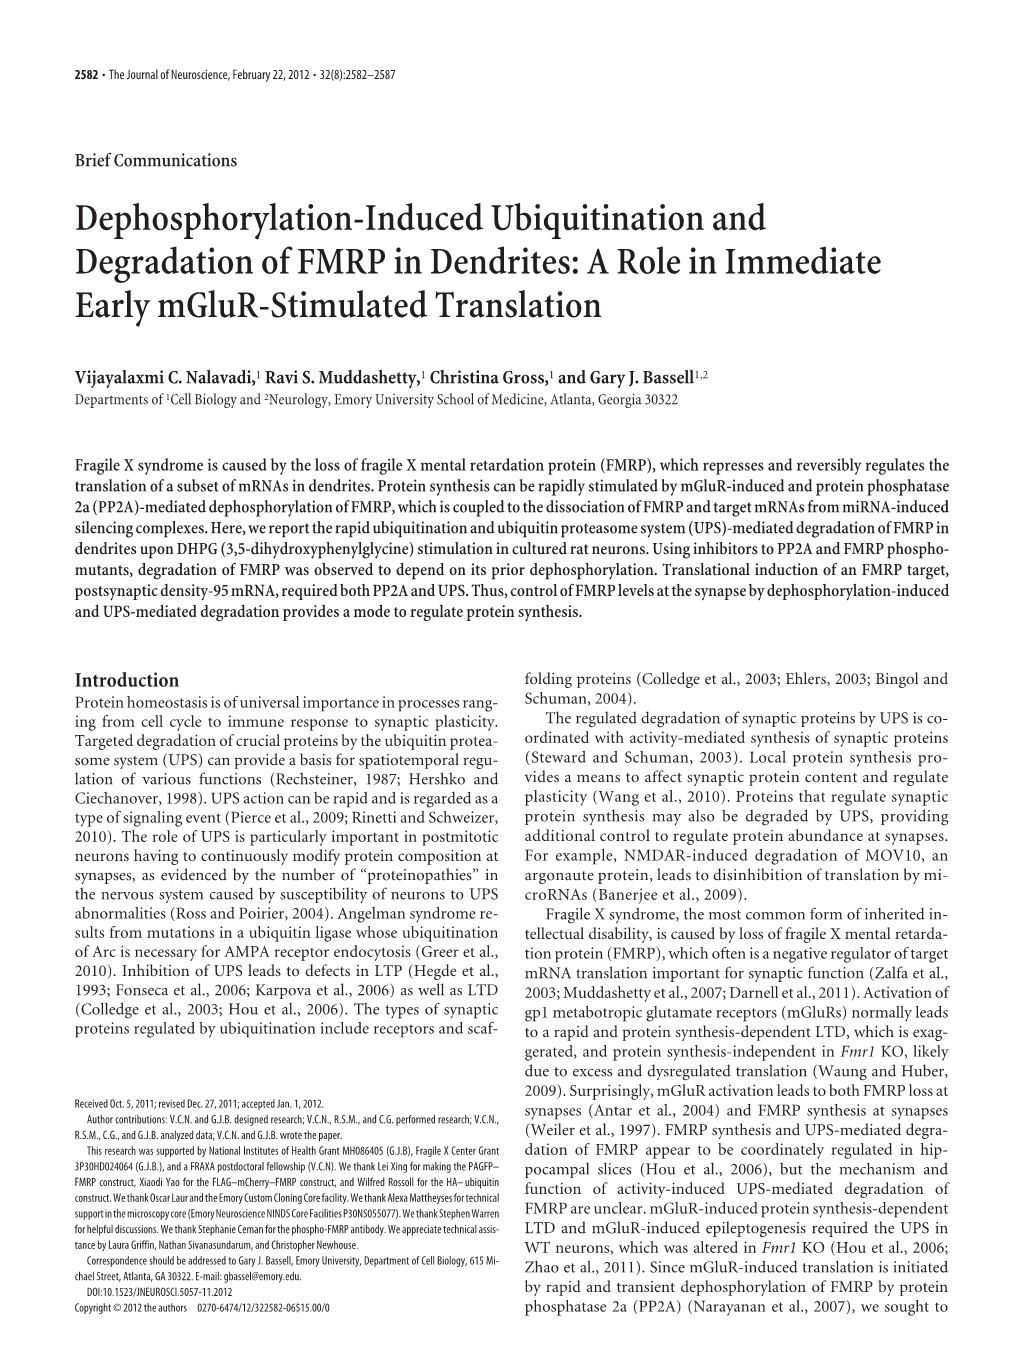 Dephosphorylation-Induced Ubiquitination and Degradation of FMRP in Dendrites: a Role in Immediate Early Mglur-Stimulated Translation